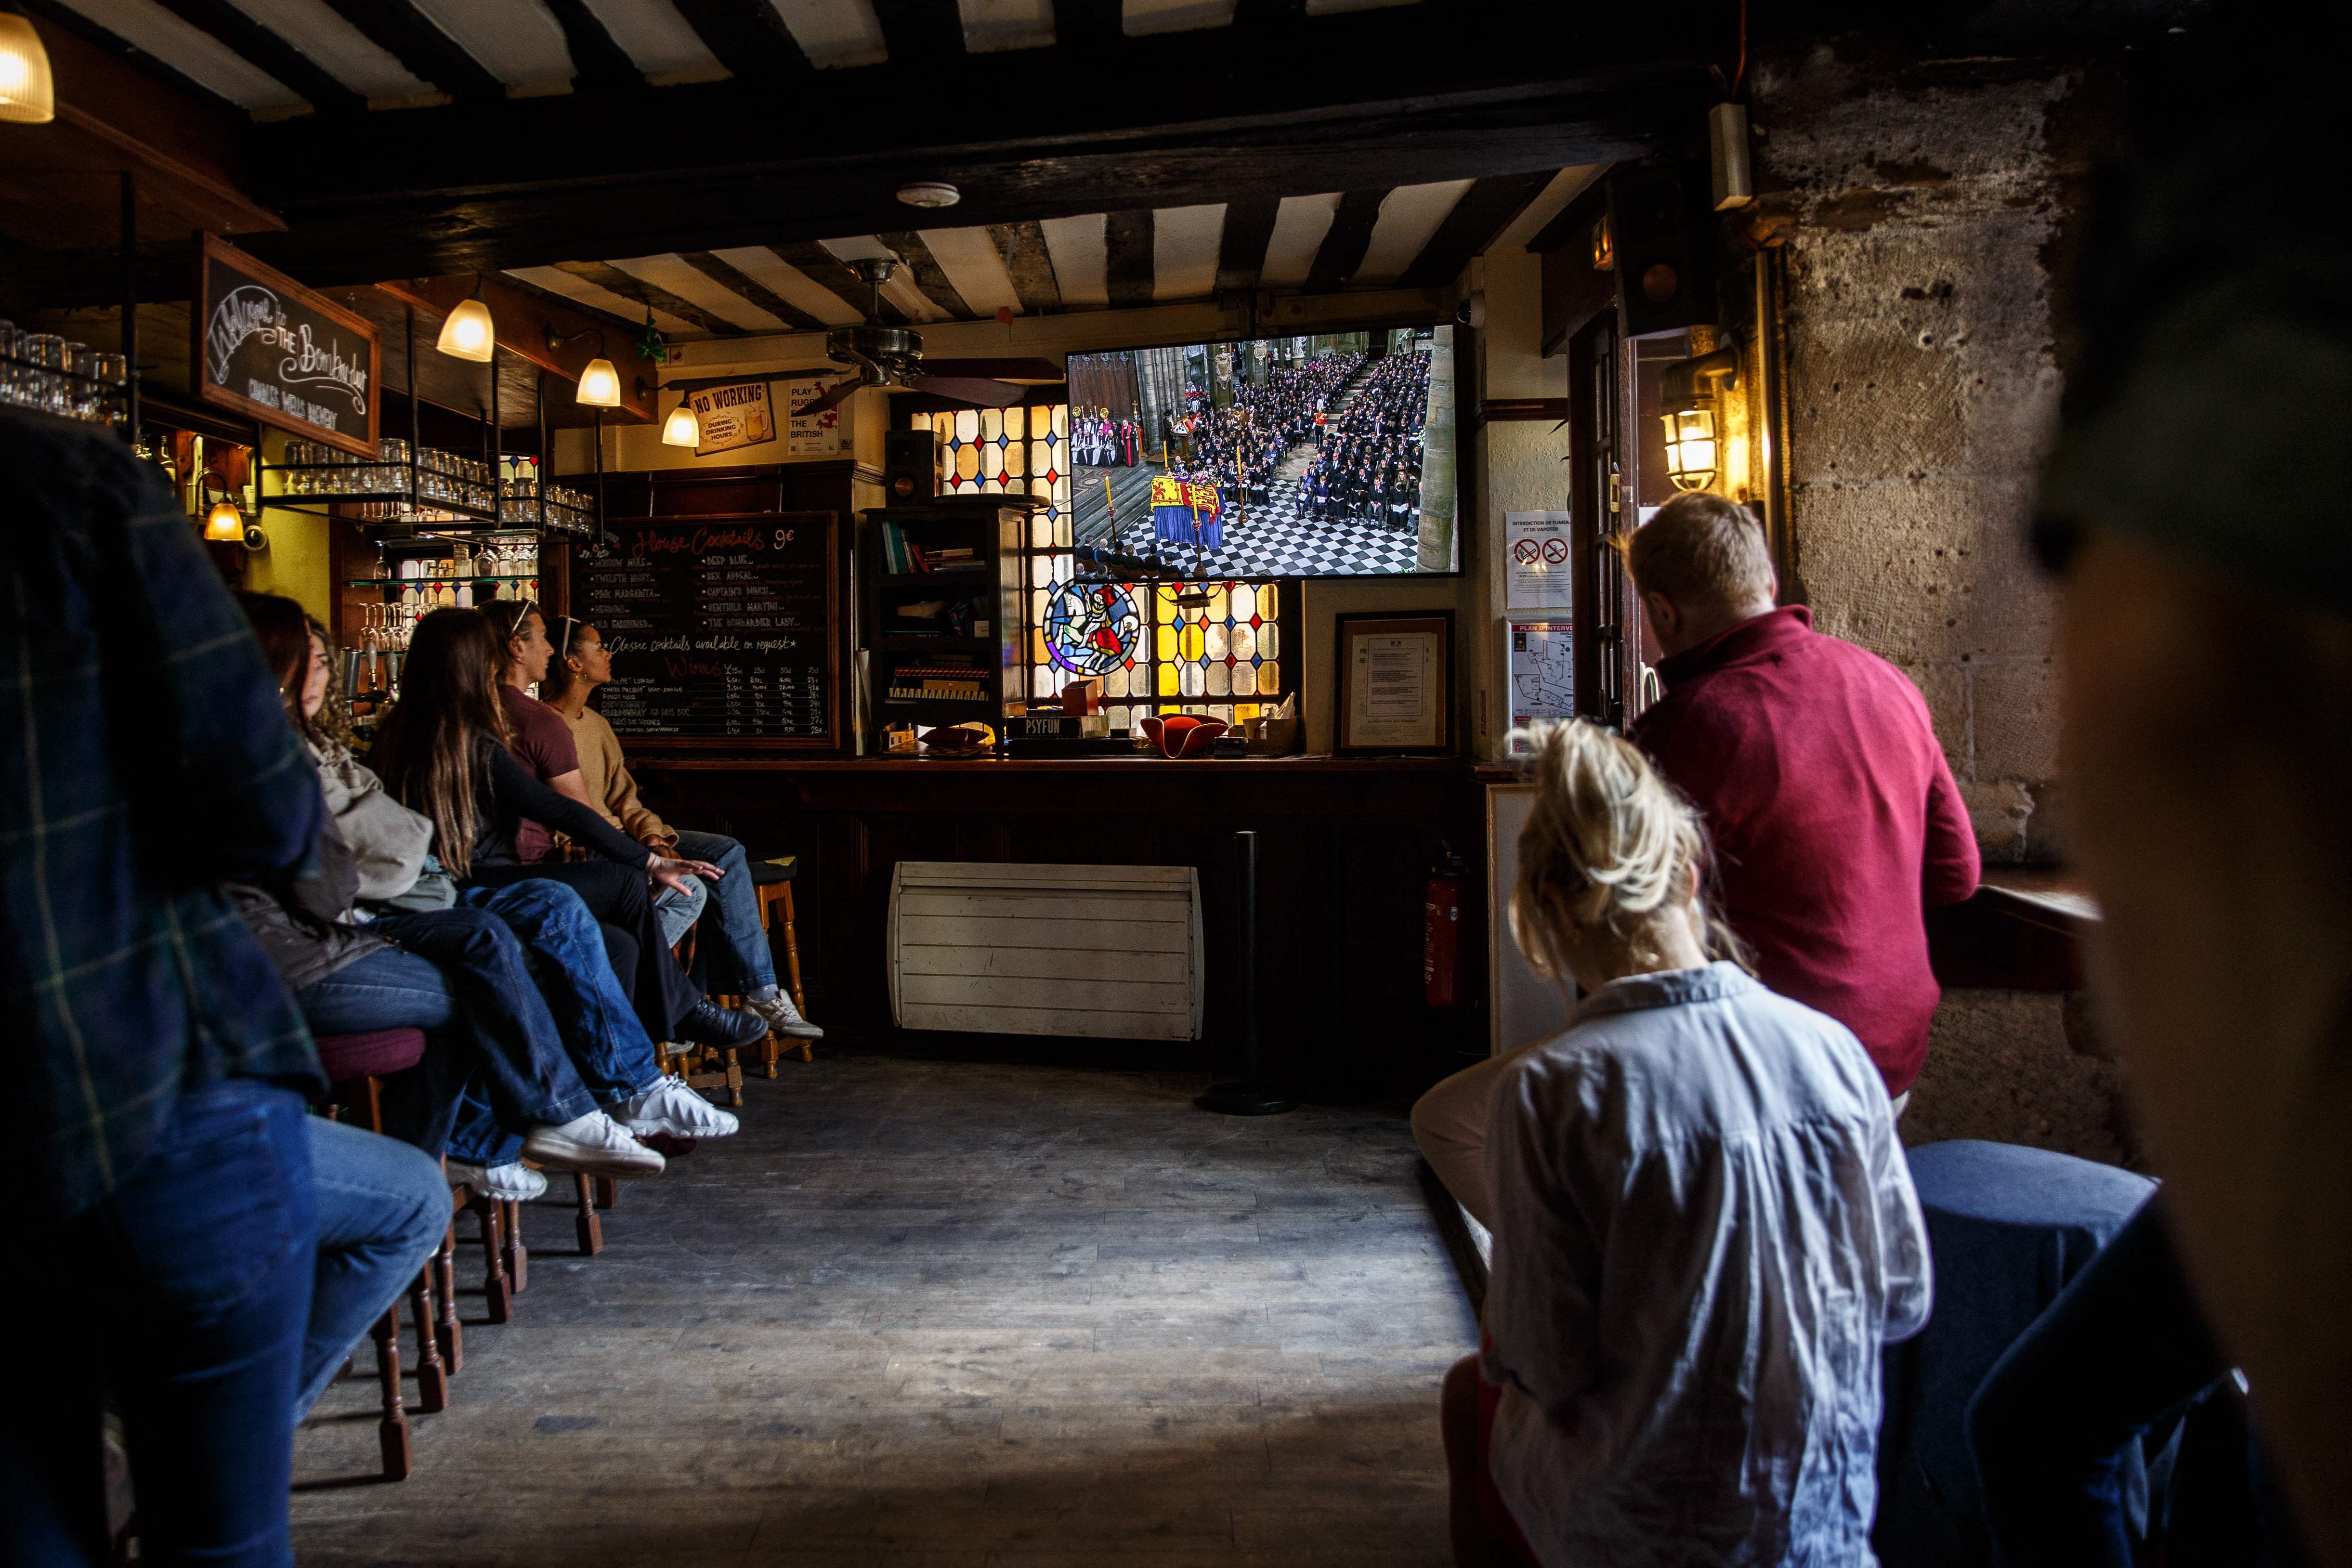 Well-wishers gathered in an English pub in Paris to watch the funeral